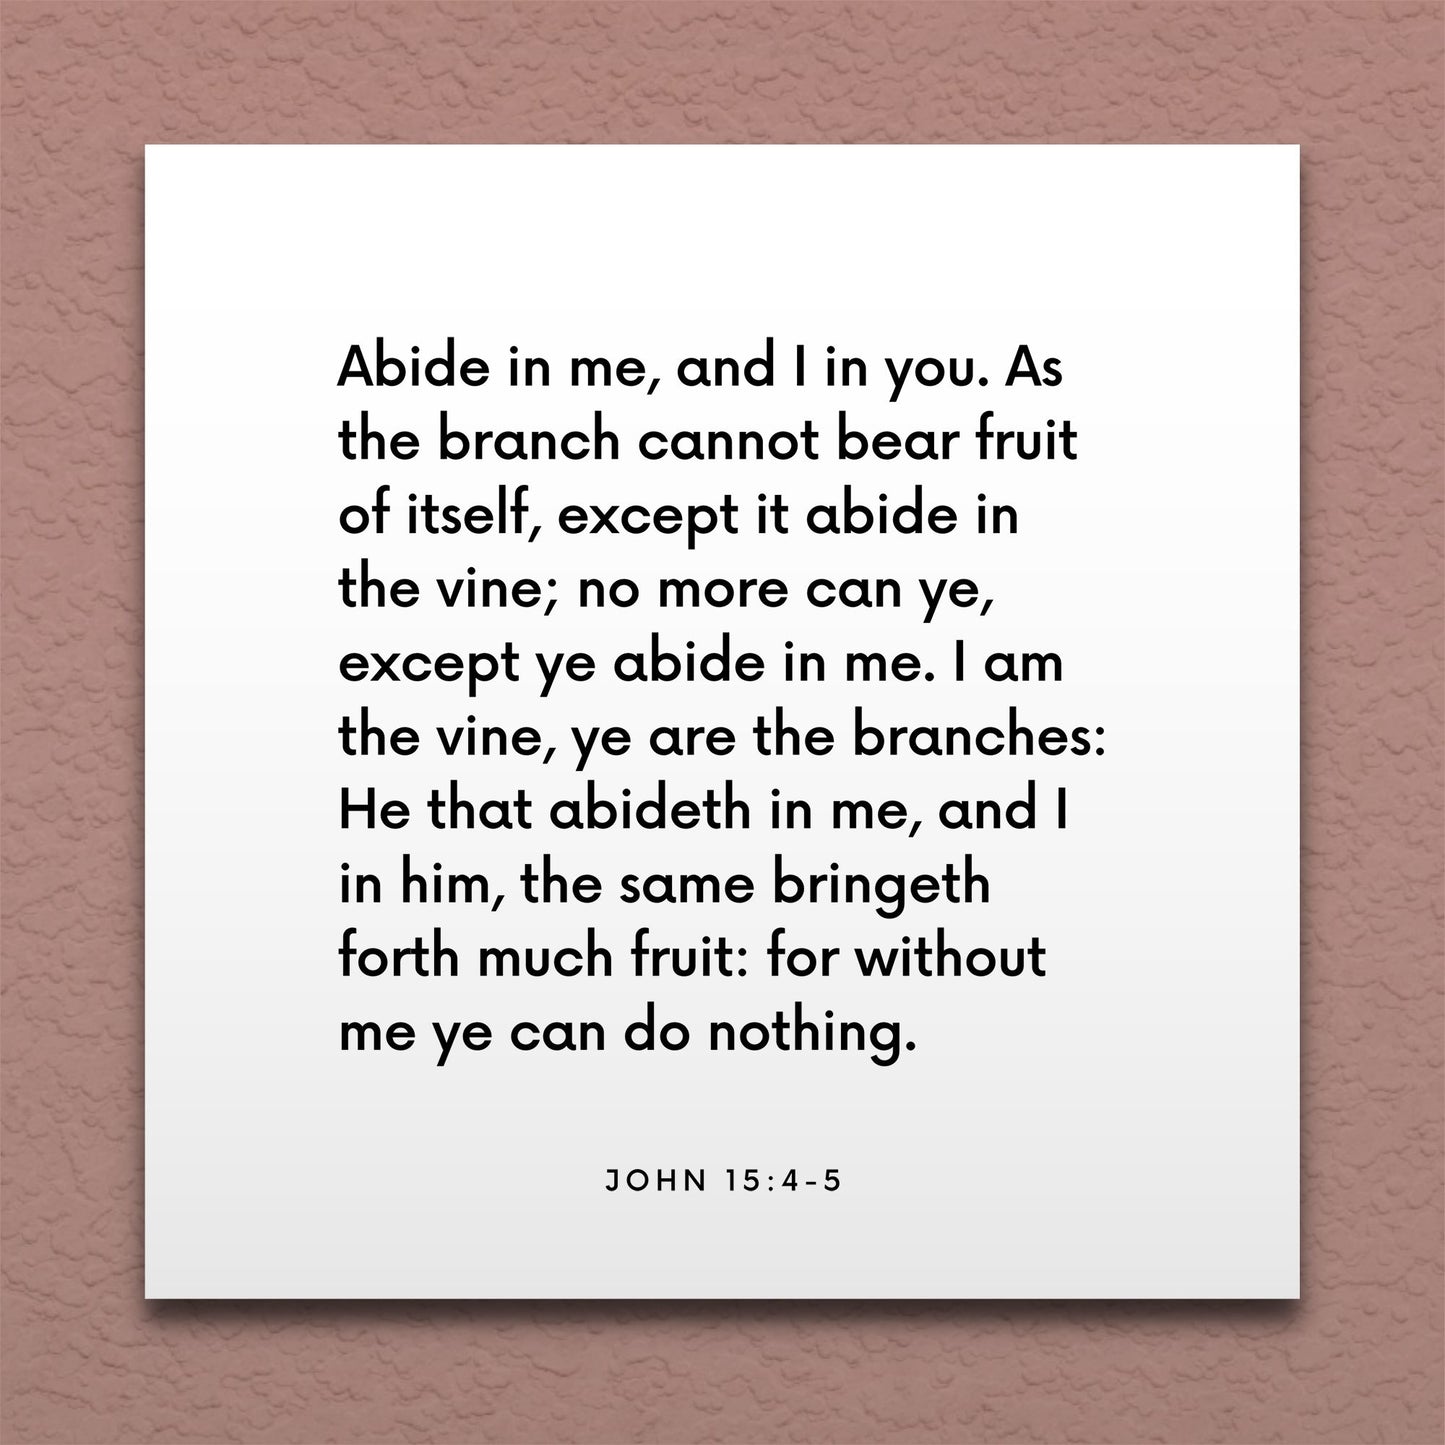 Wall-mounted scripture tile for John 15:4-5 - "Abide in me, and I in you"